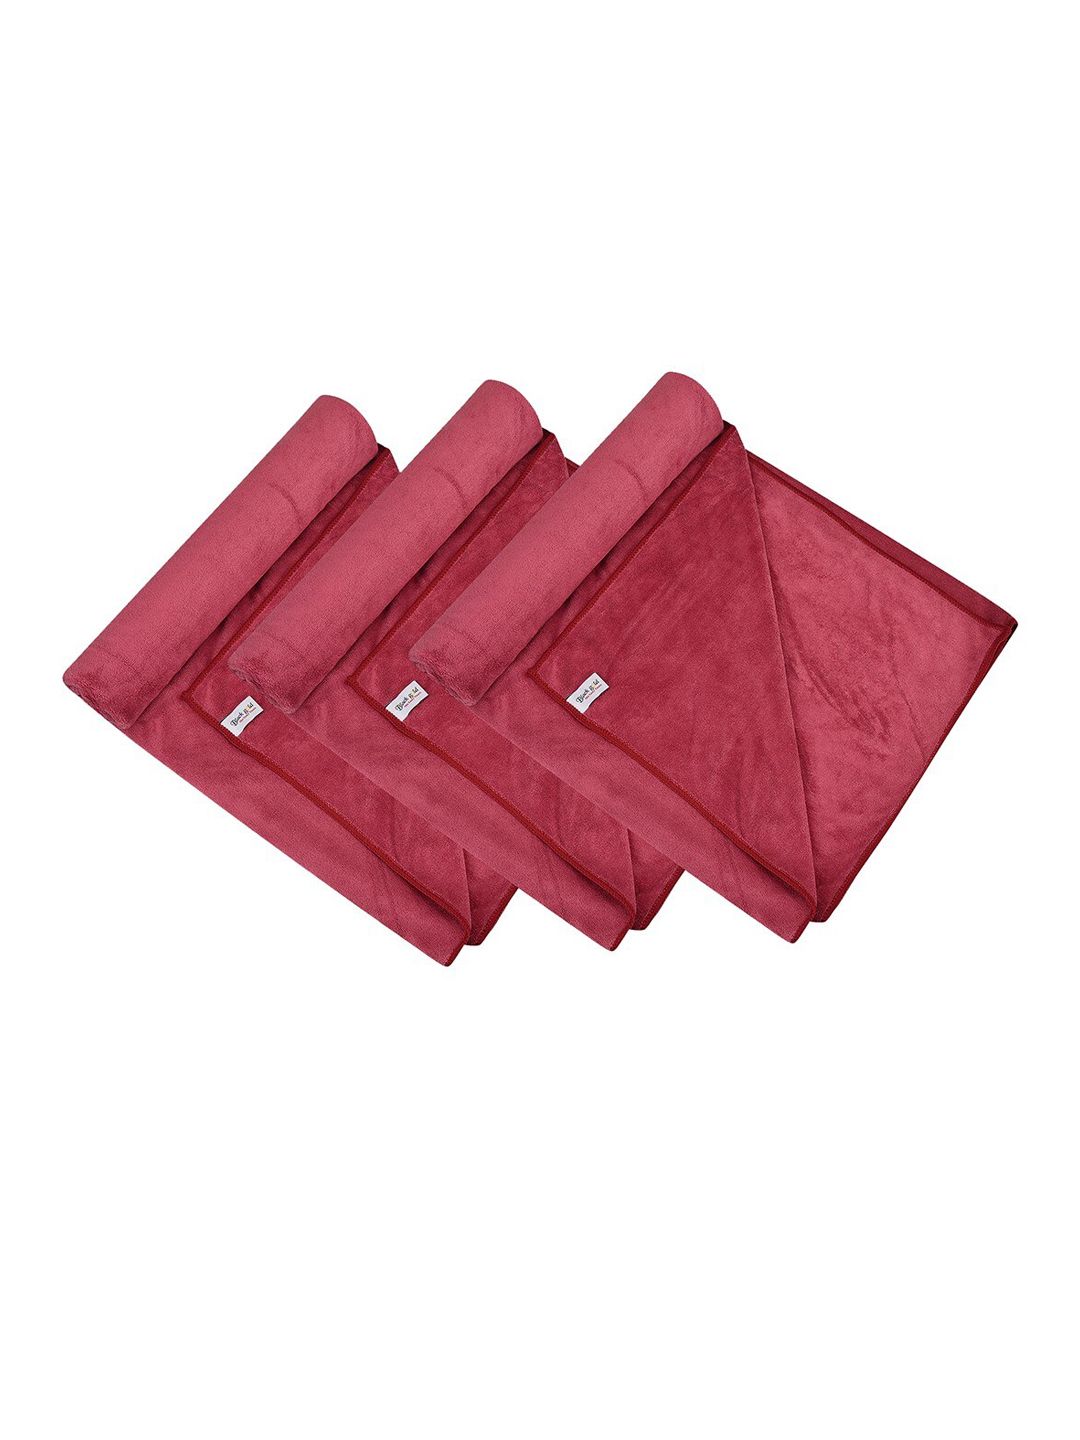 Black gold Set Of 3 Solid 400 GSM Microfiber Bath Towels Price in India